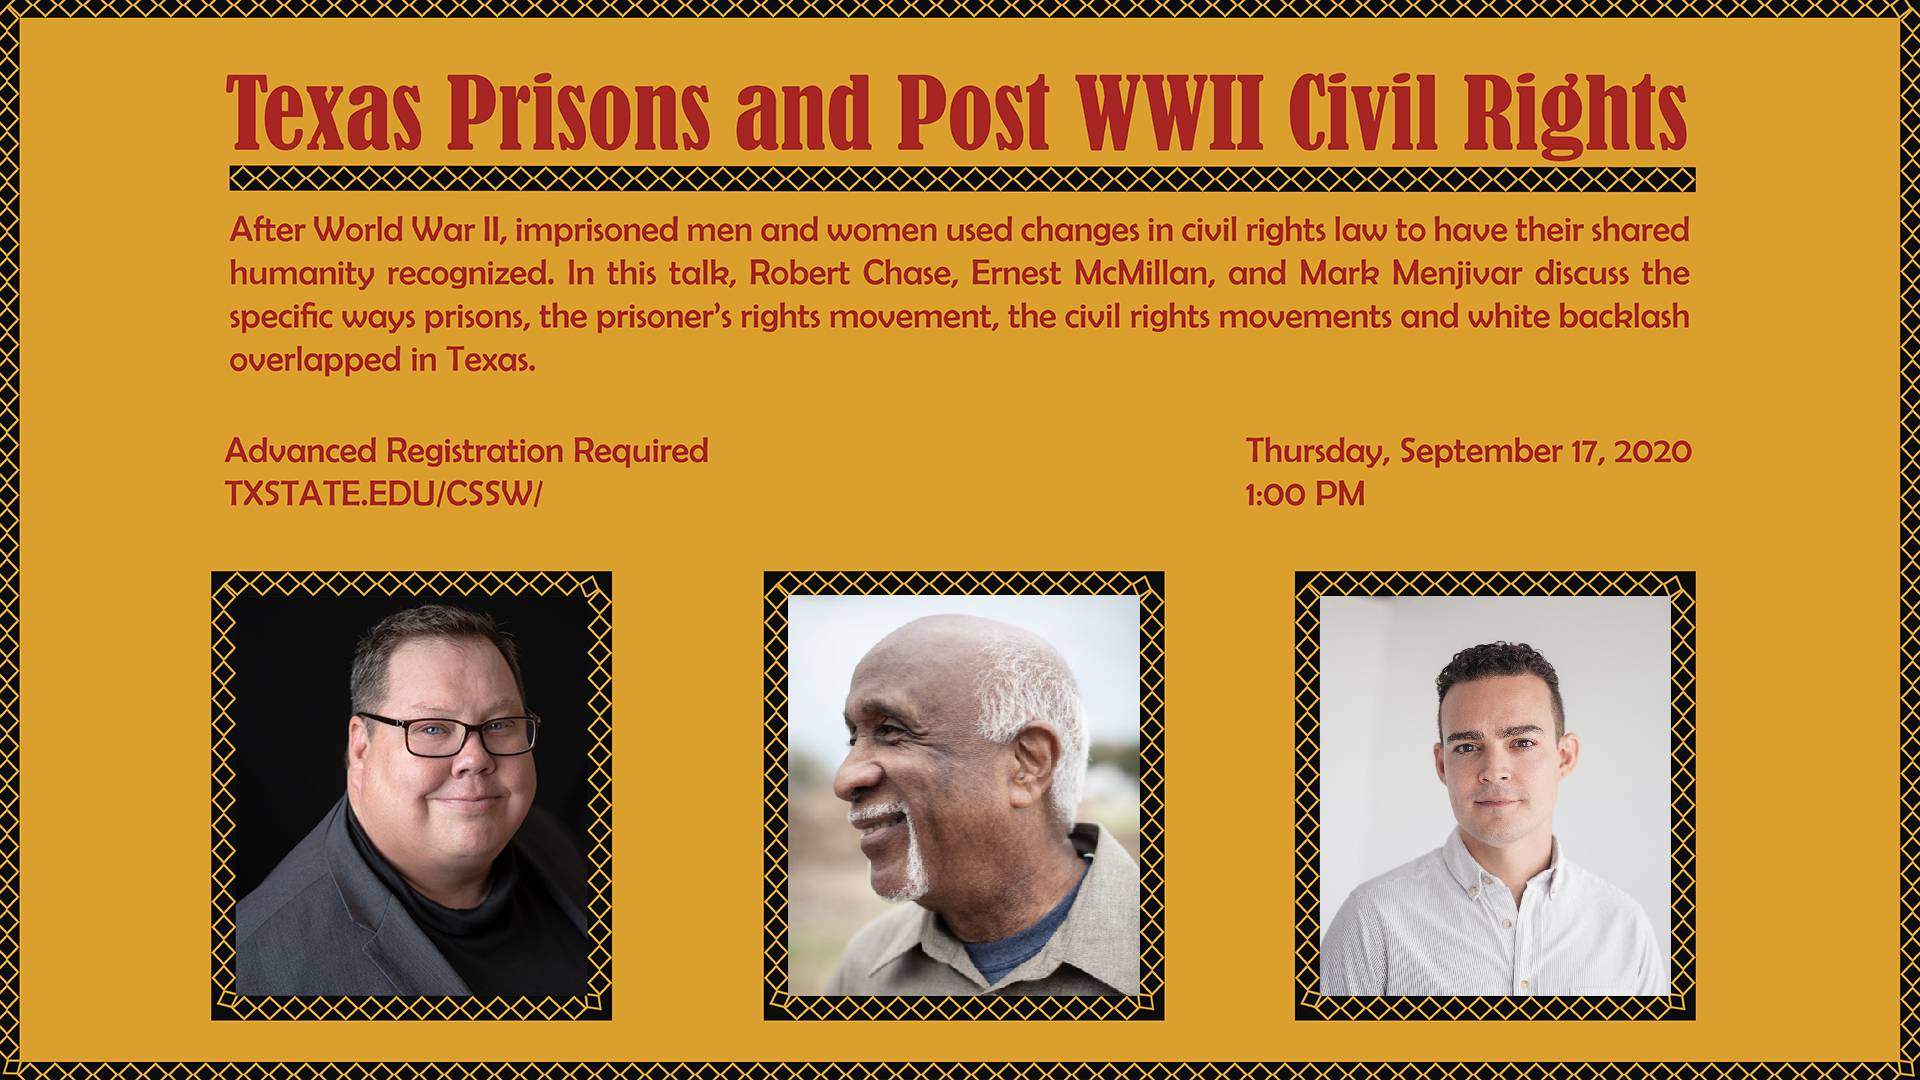 Texas Prisons and Civil Rights Event Image